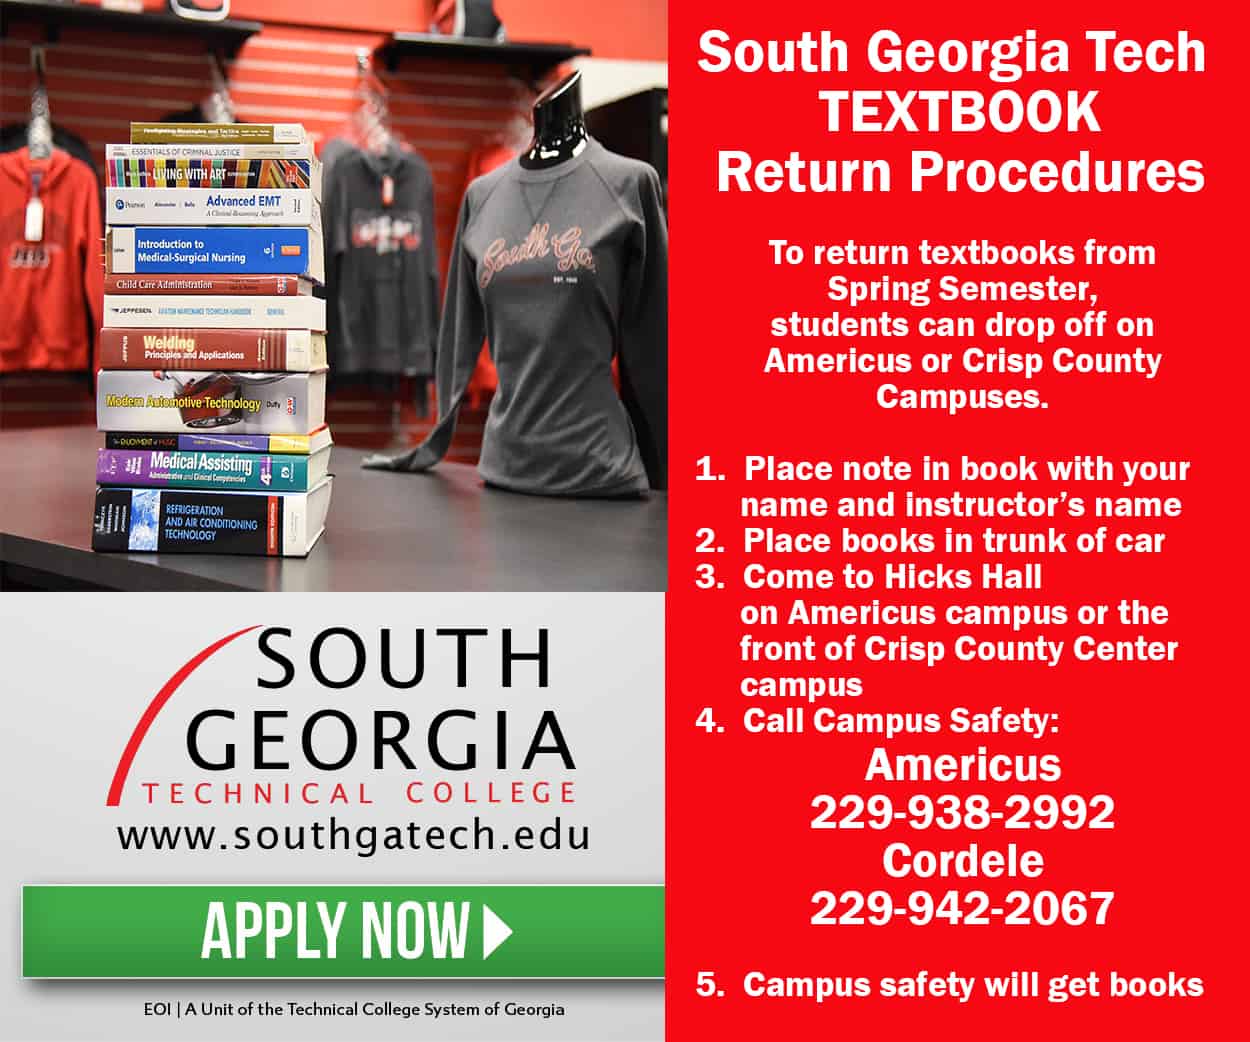 Procedures for returning textbooks to South Georgia Technical College at the end of Spring Semester announced.